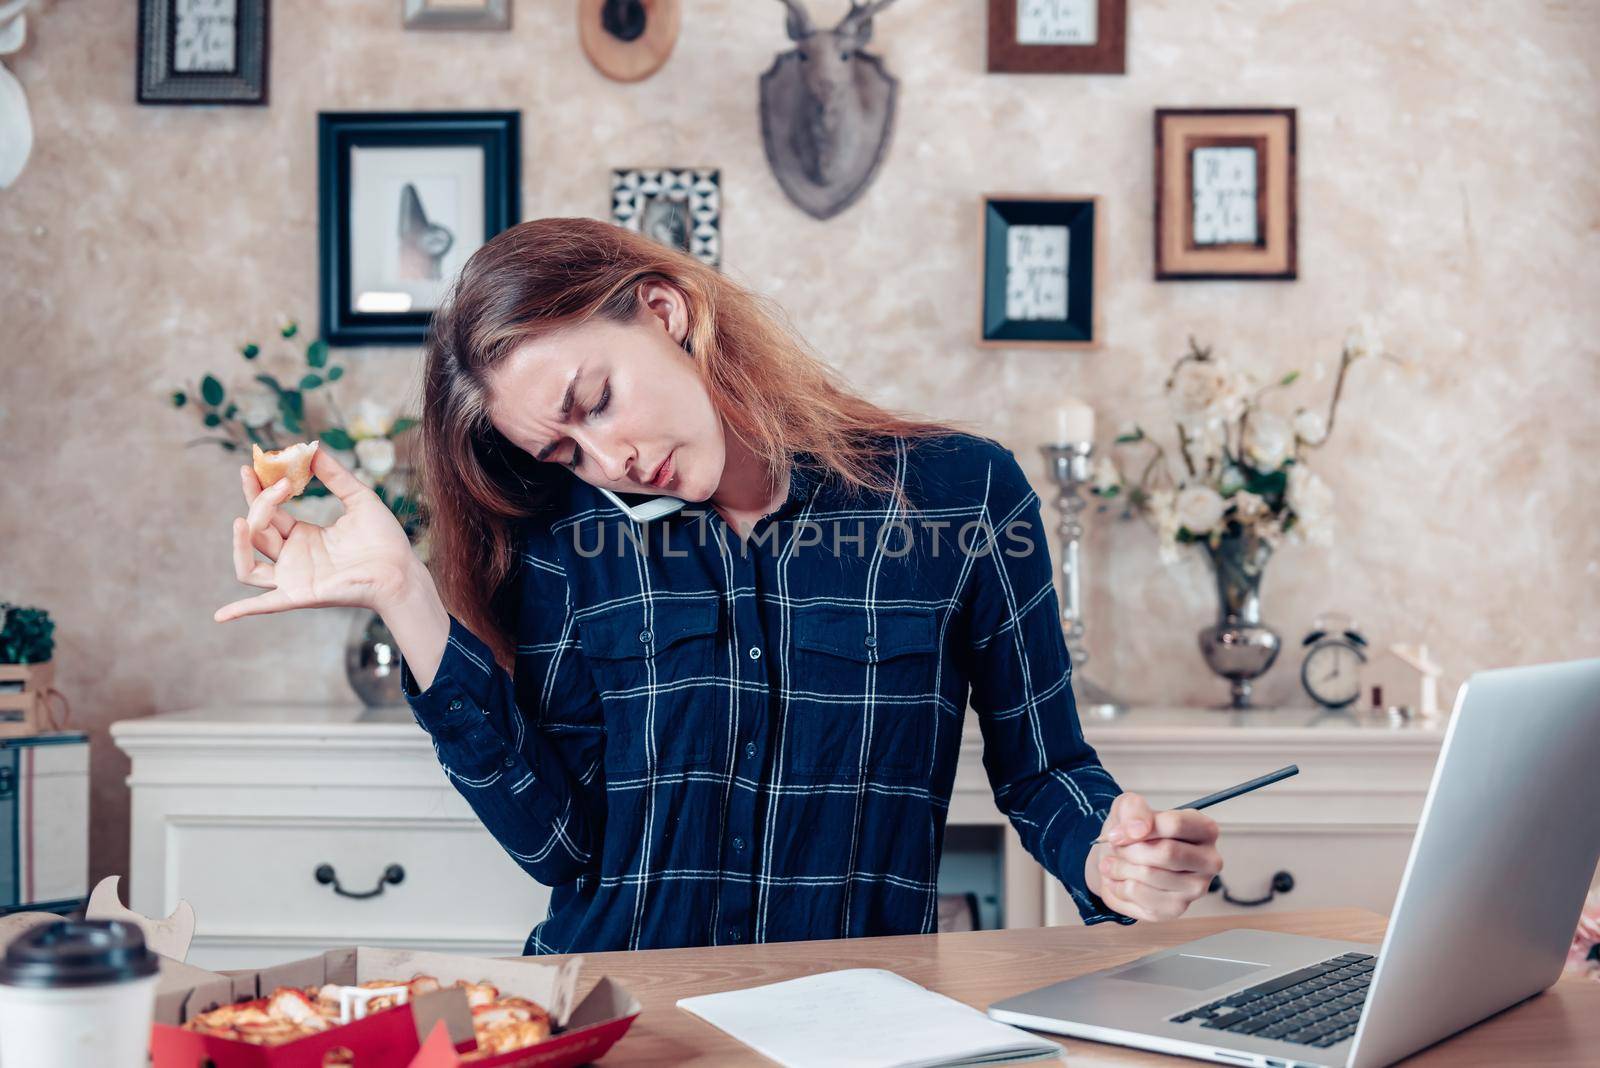 Busy Businesswoman Work at Home While Working on Table Desk With Laptop at The Same Time She Eating, Business Woman Entrepreneur Work From Home With Serious Communicating Busy Tasking. Work Lifestyles by MahaHeang245789